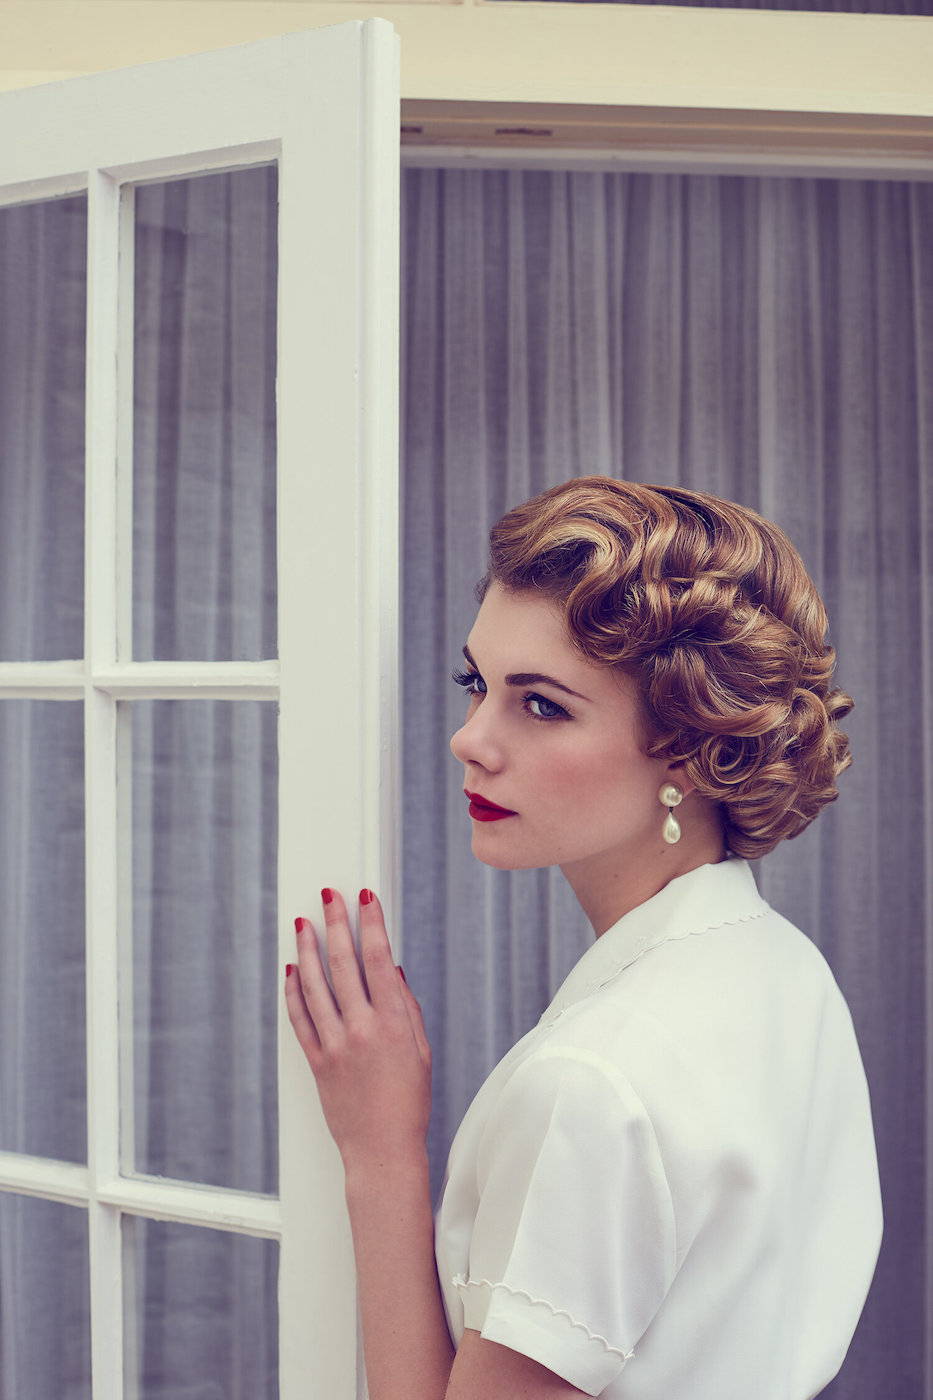 Model wears authentic 1950s style hair and make-up